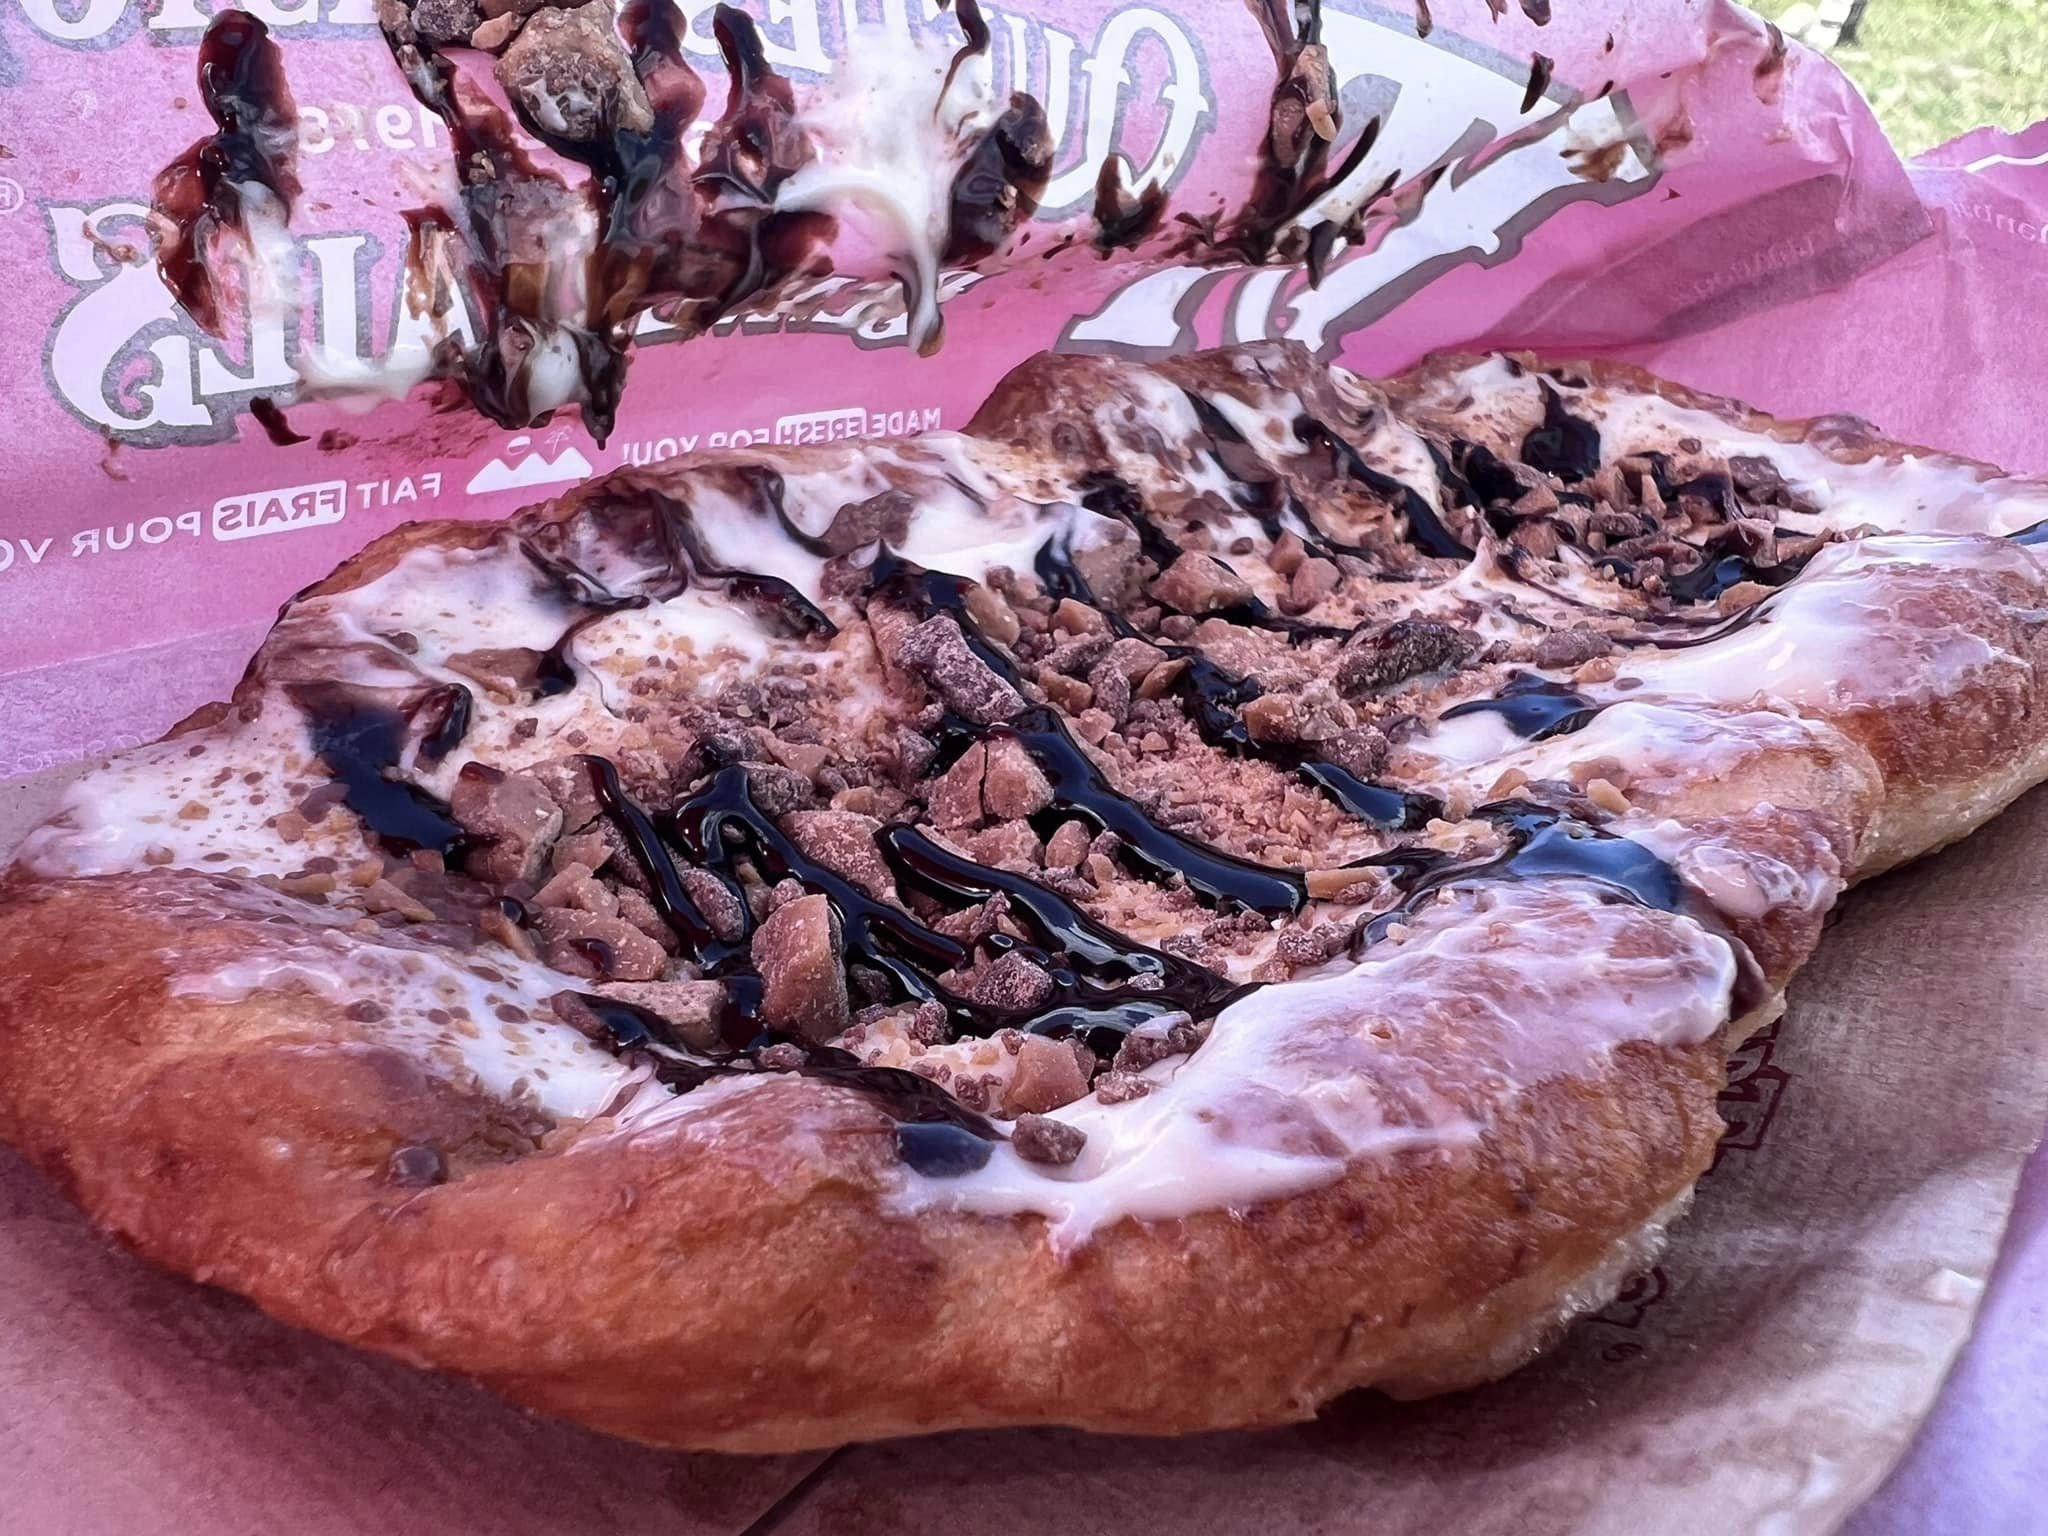 The Avalanche BeaverTail (Skor Cheesecake) considered to be one of the most popular flavours according to the staff. Photo by David Tuan Bui.